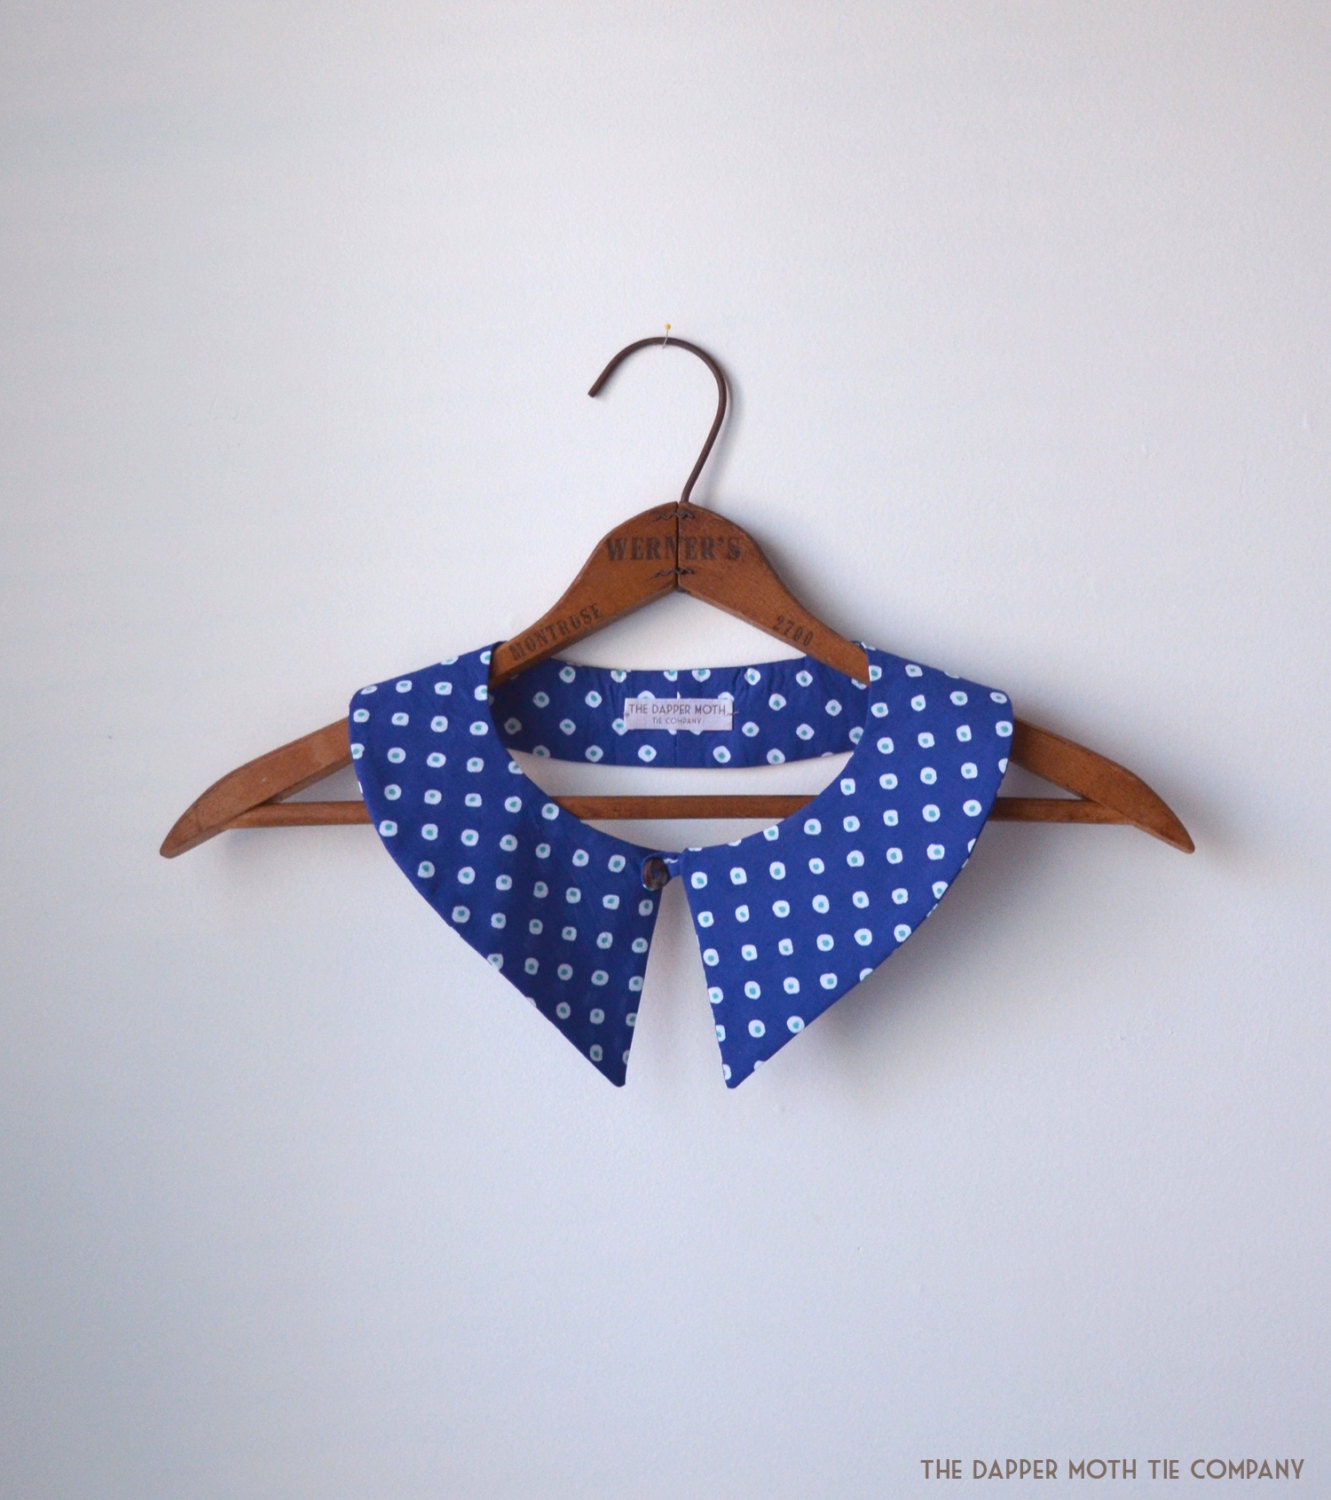 The Wednesday- a detachable pointed end collar, made to order in any pattern